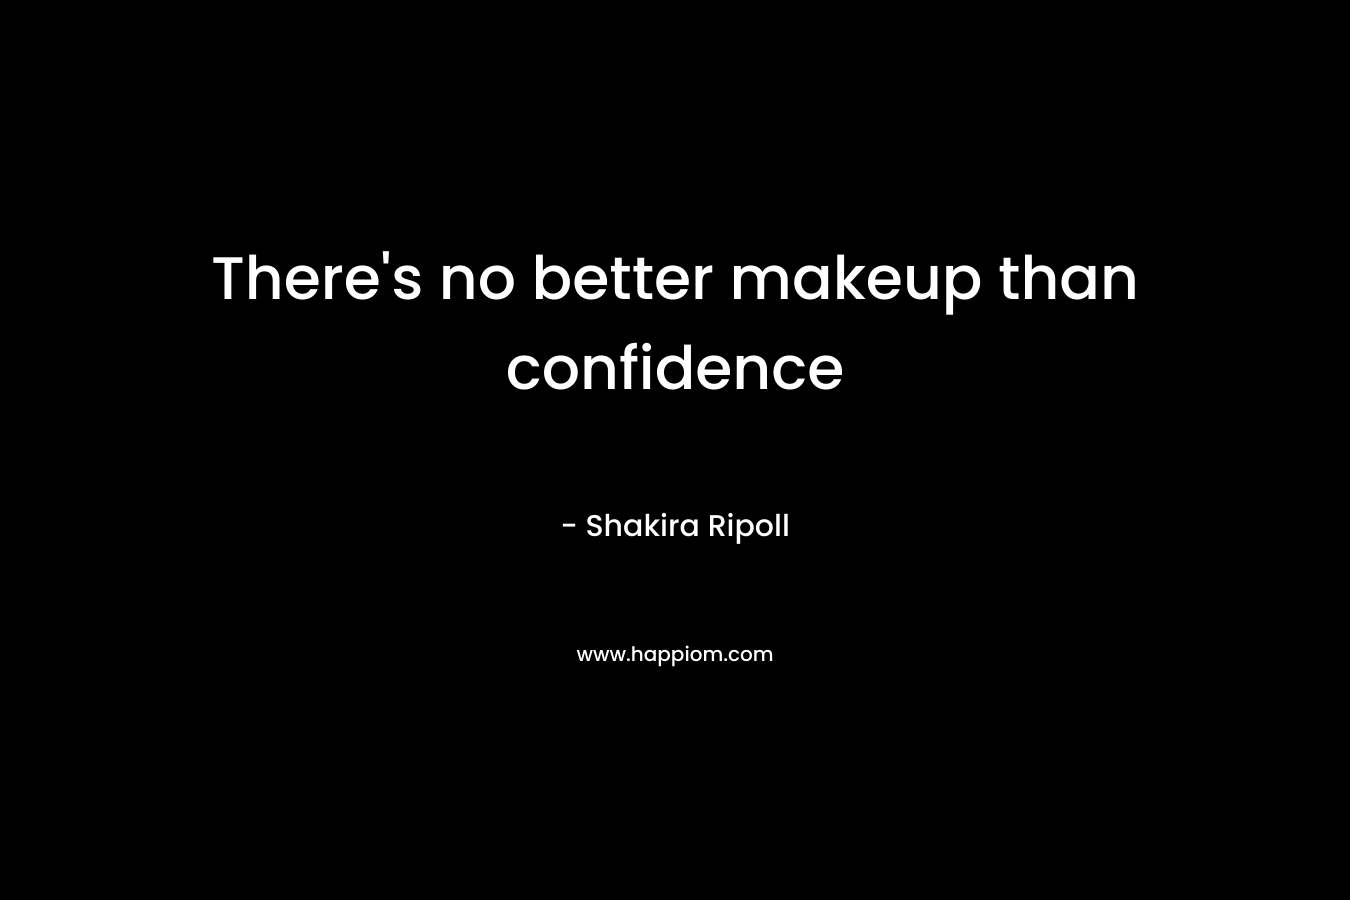 There's no better makeup than confidence